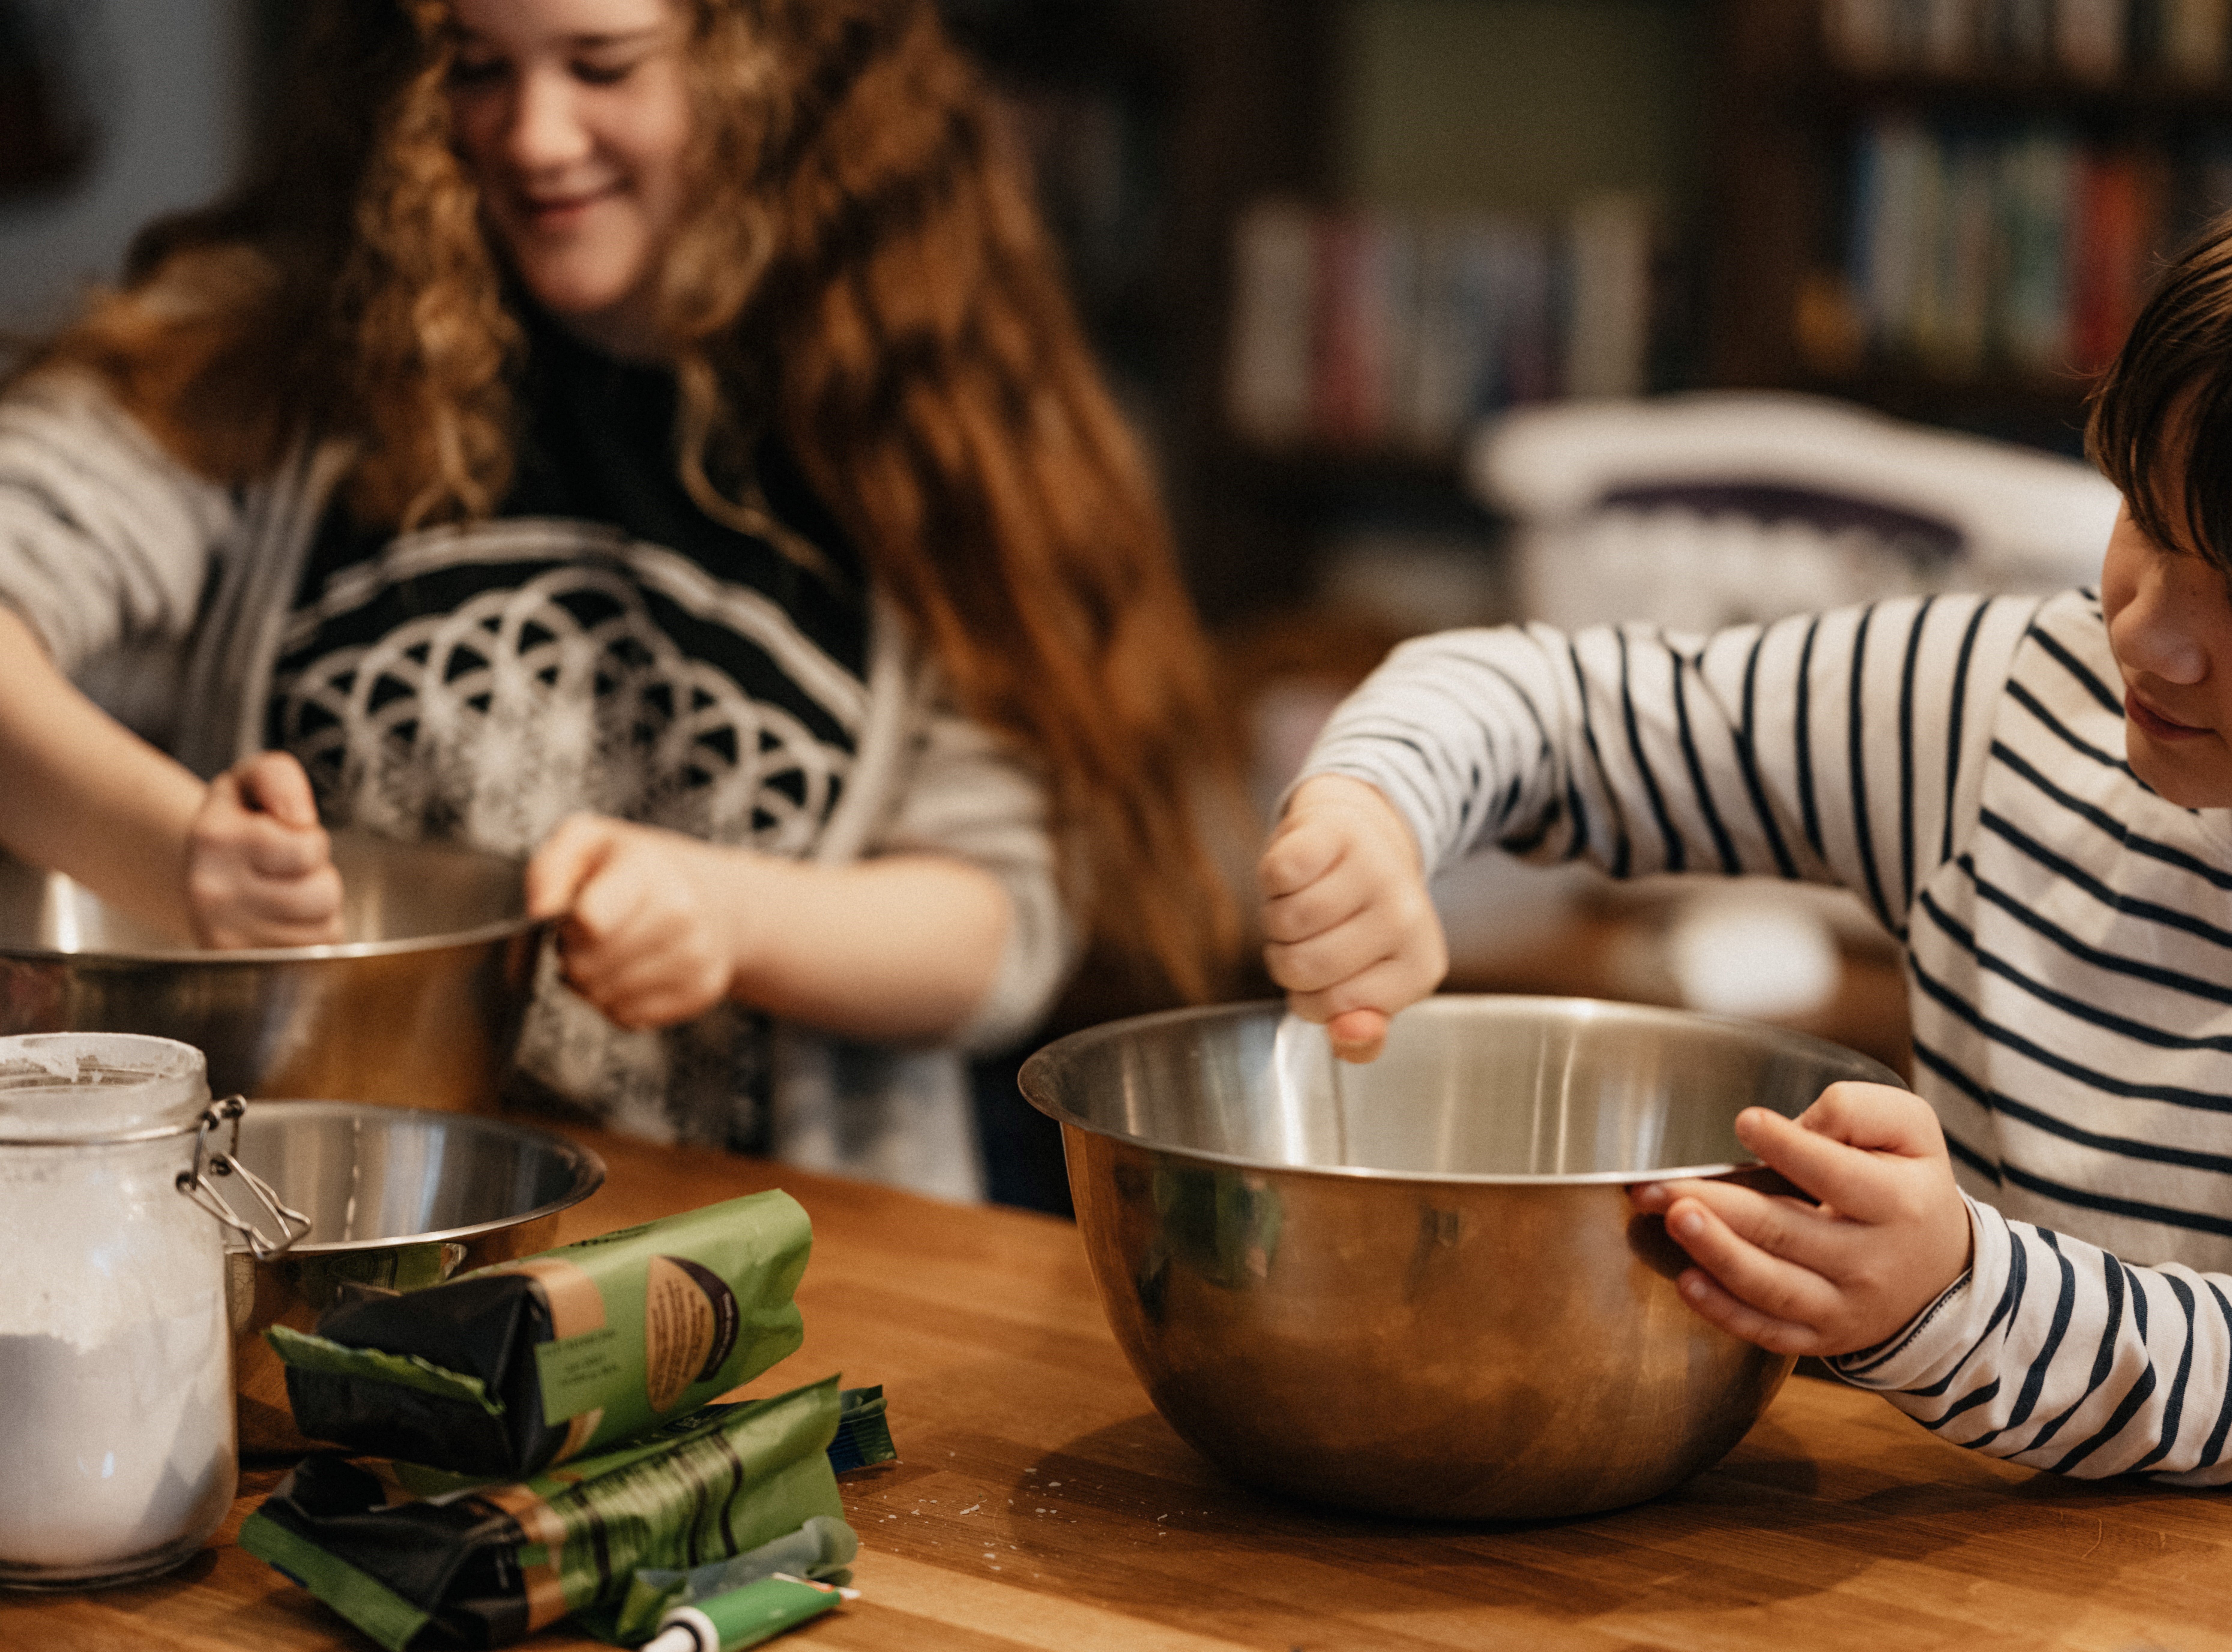 My children Jimmy and Jessy cooking together. | Source: Unsplash